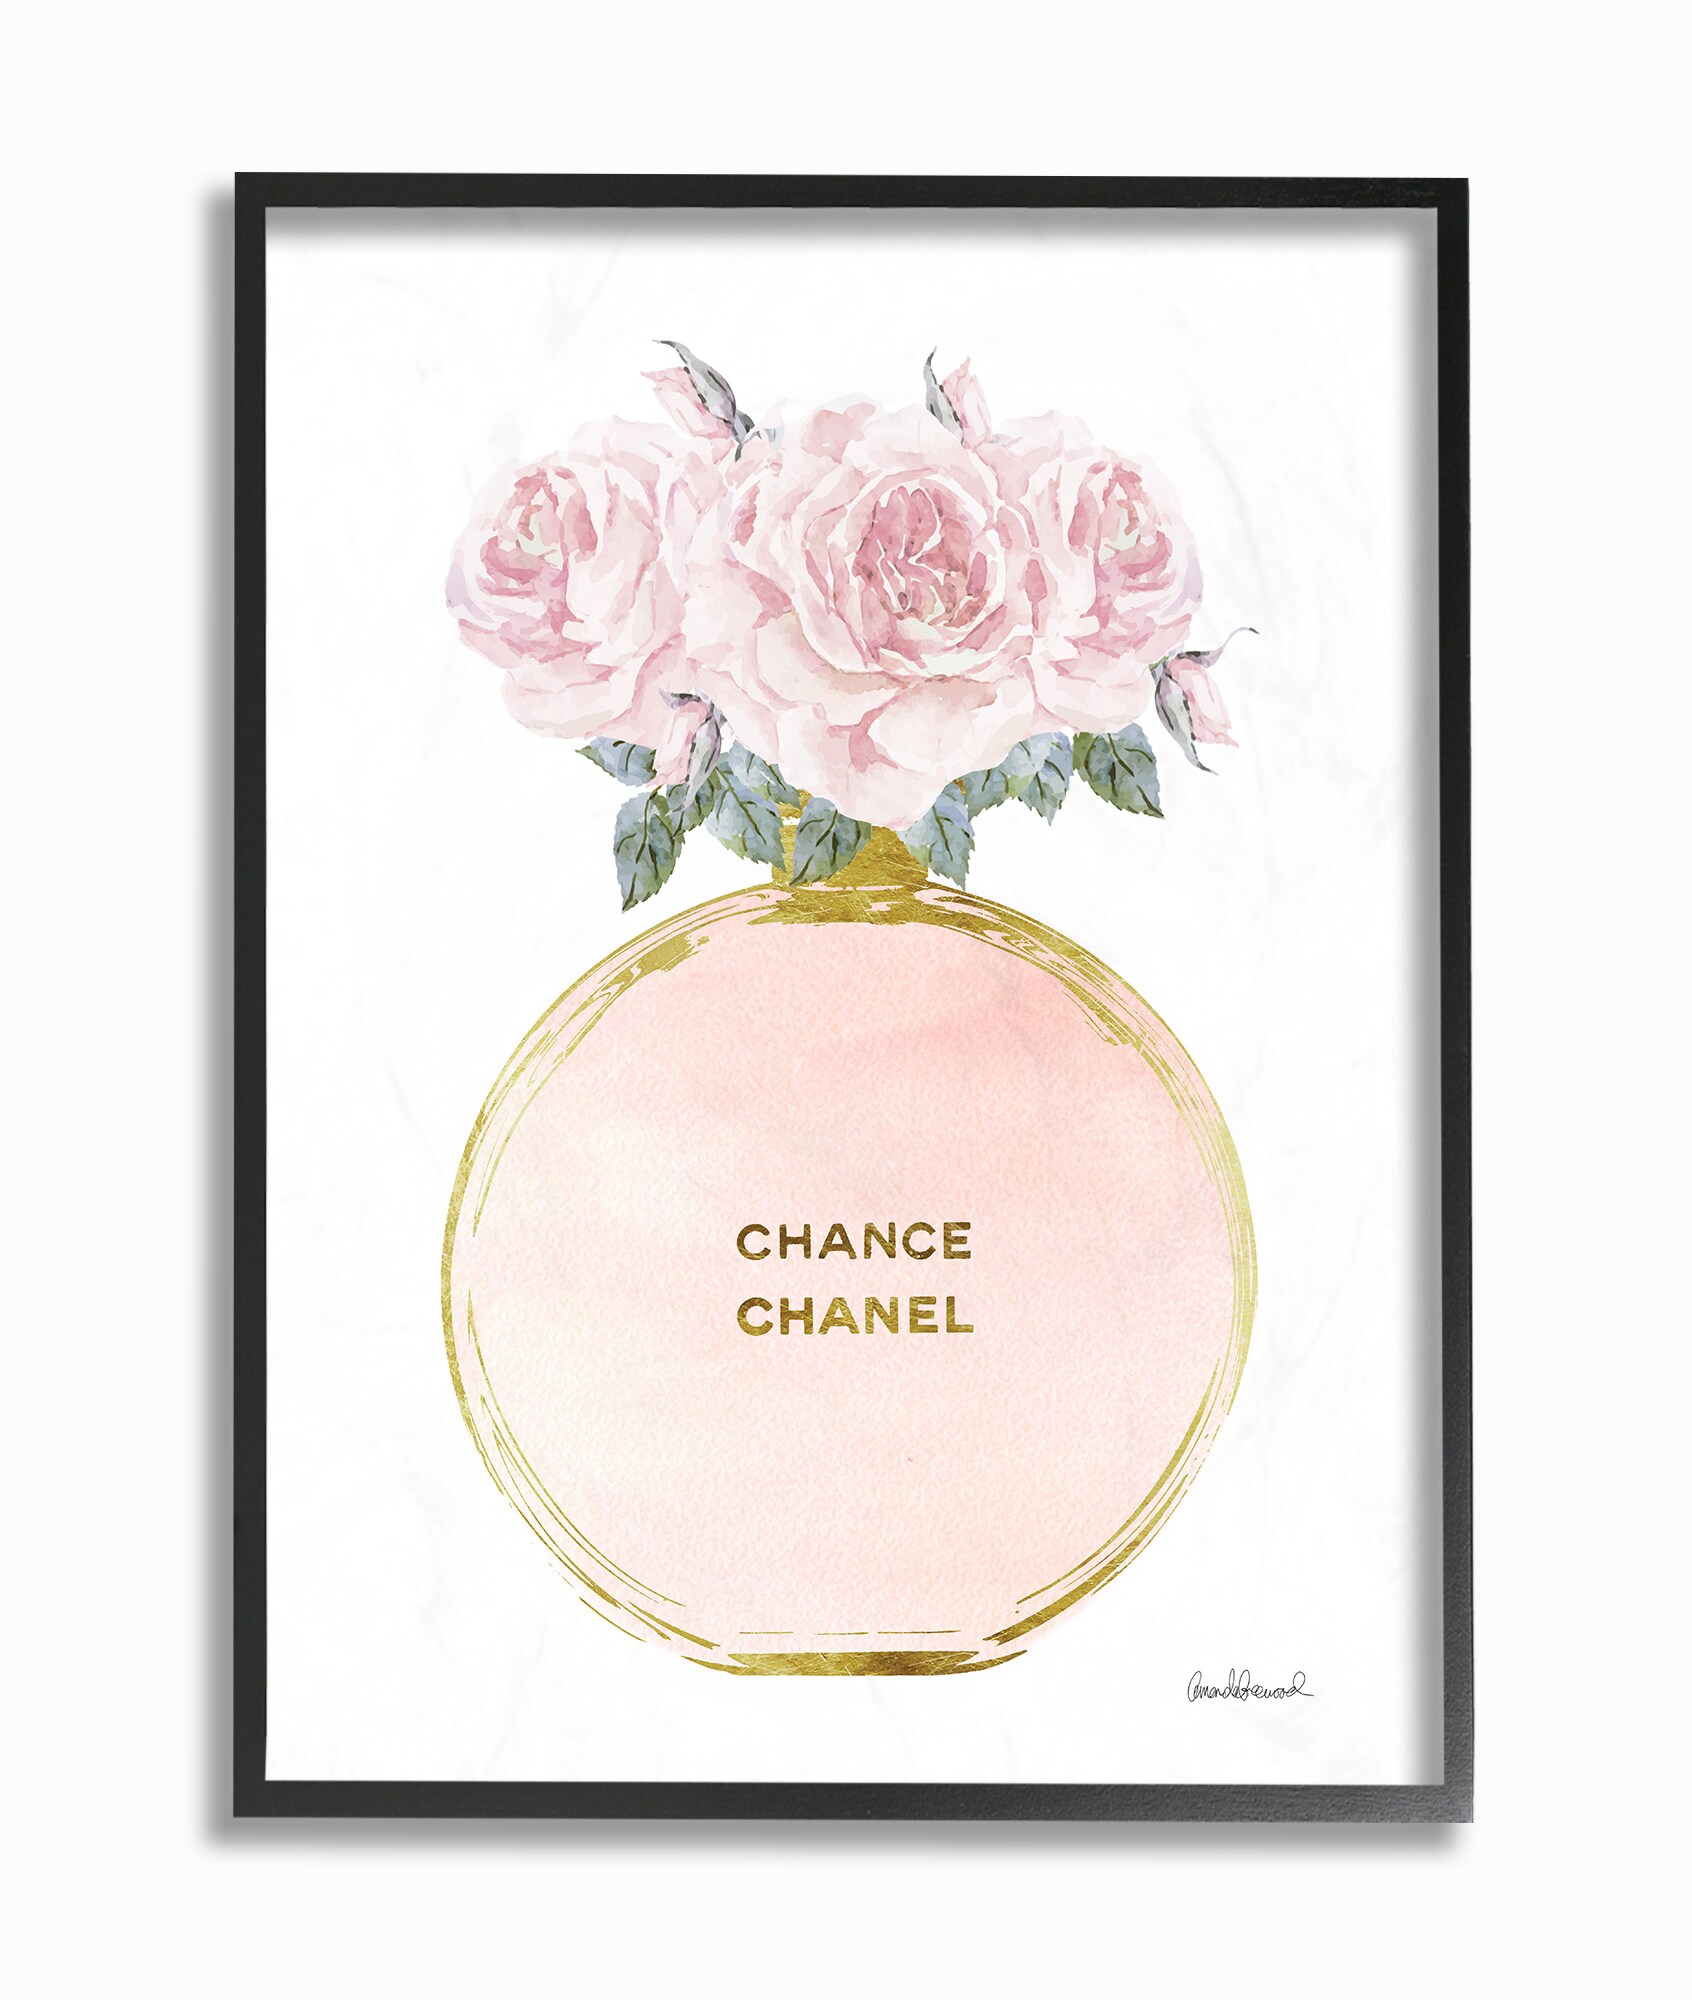 Stupell Industries Pink and Gold Round Perfume Bottle with Roses Framed  14-in H x 11-in W Novelty Wood Print at